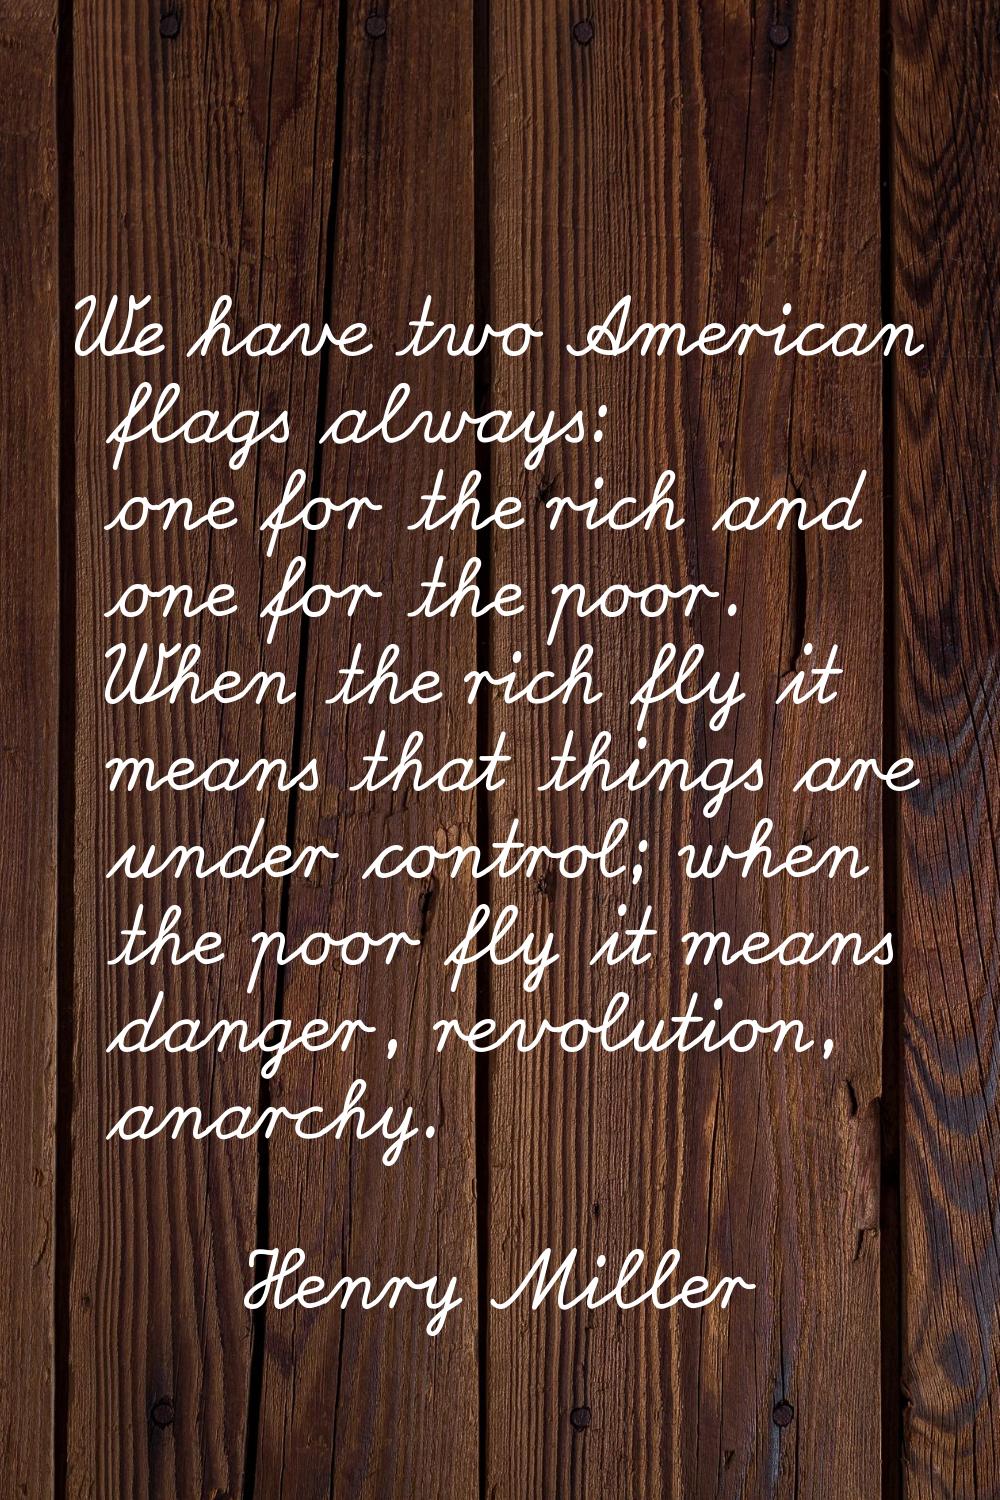 We have two American flags always: one for the rich and one for the poor. When the rich fly it mean